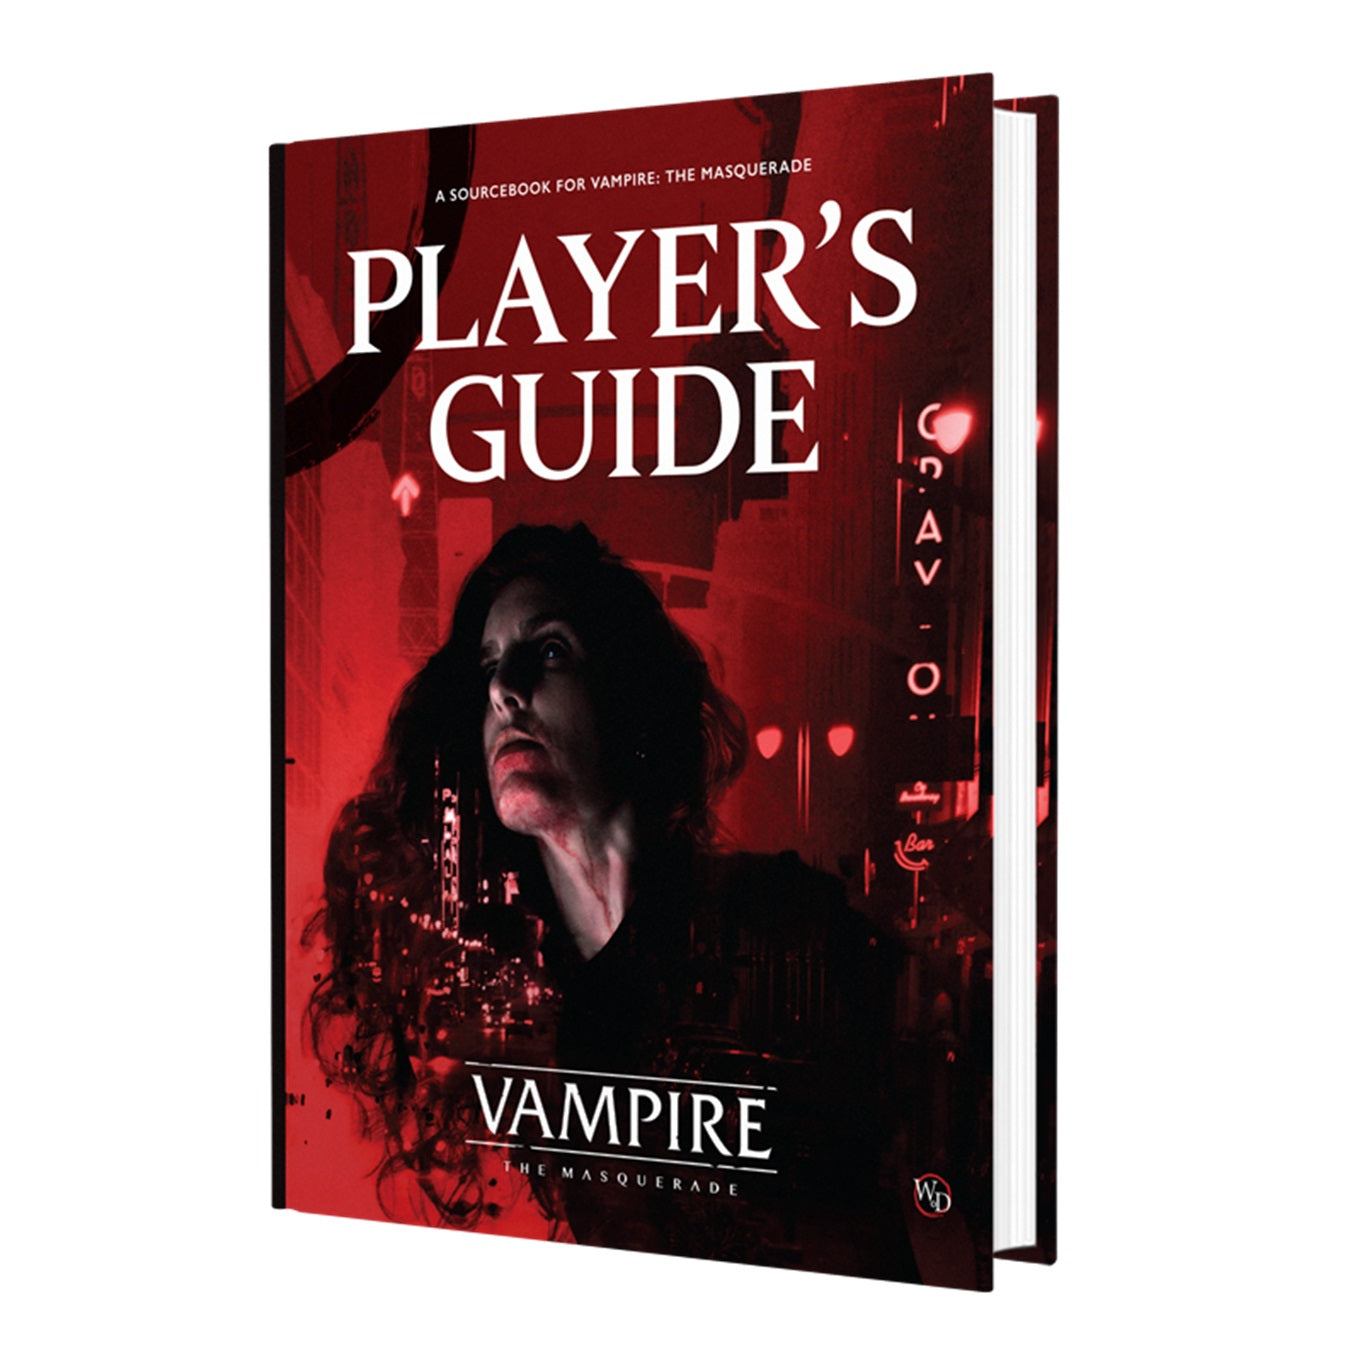 Vampire The Masquerade: 5th Edition Players Guide - Bards & Cards